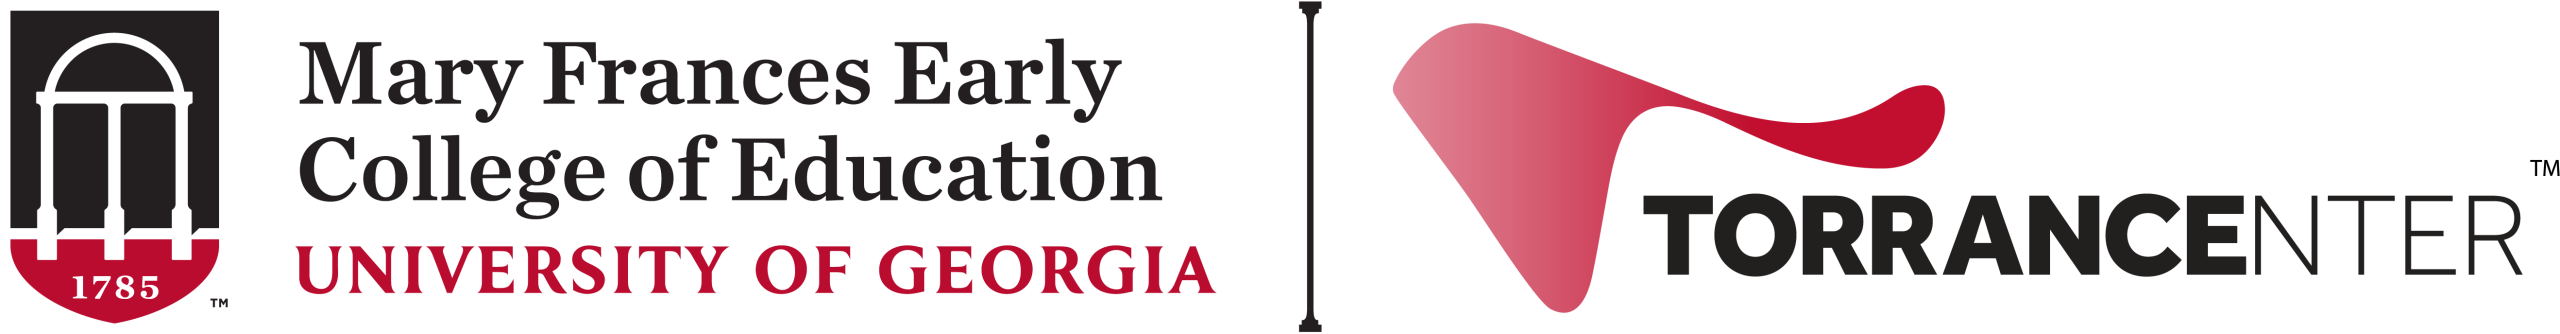 Co-branded logo featuring The University of Georgia Mary Frances Early College of Education logo, which features a red and black shield with an inset white arch, is to the left of the Torrance Center logo which features a red, amorphous shape. The logos are separated by a black line.  